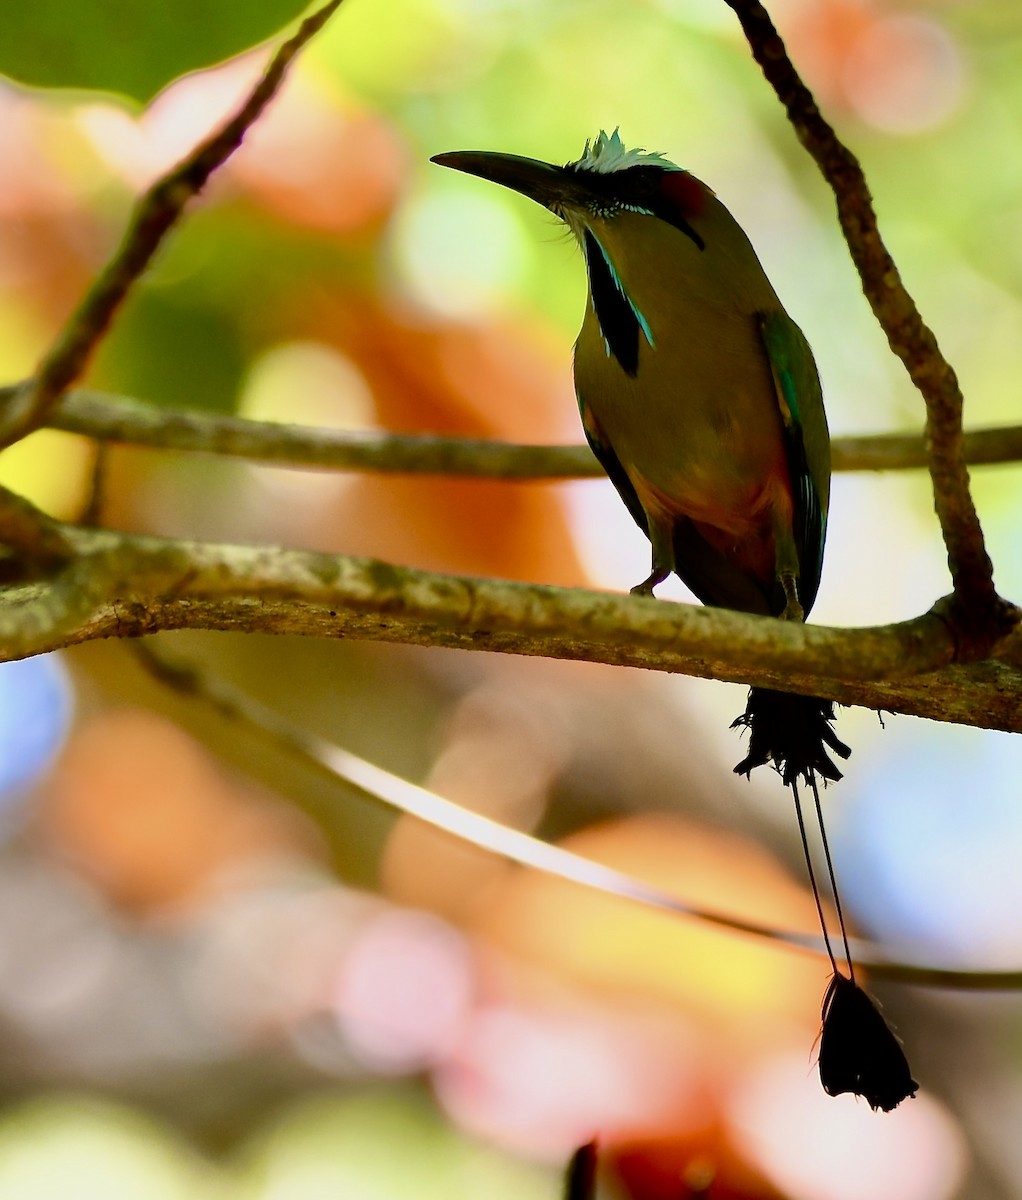 Turquoise-browed Motmot - mark perry